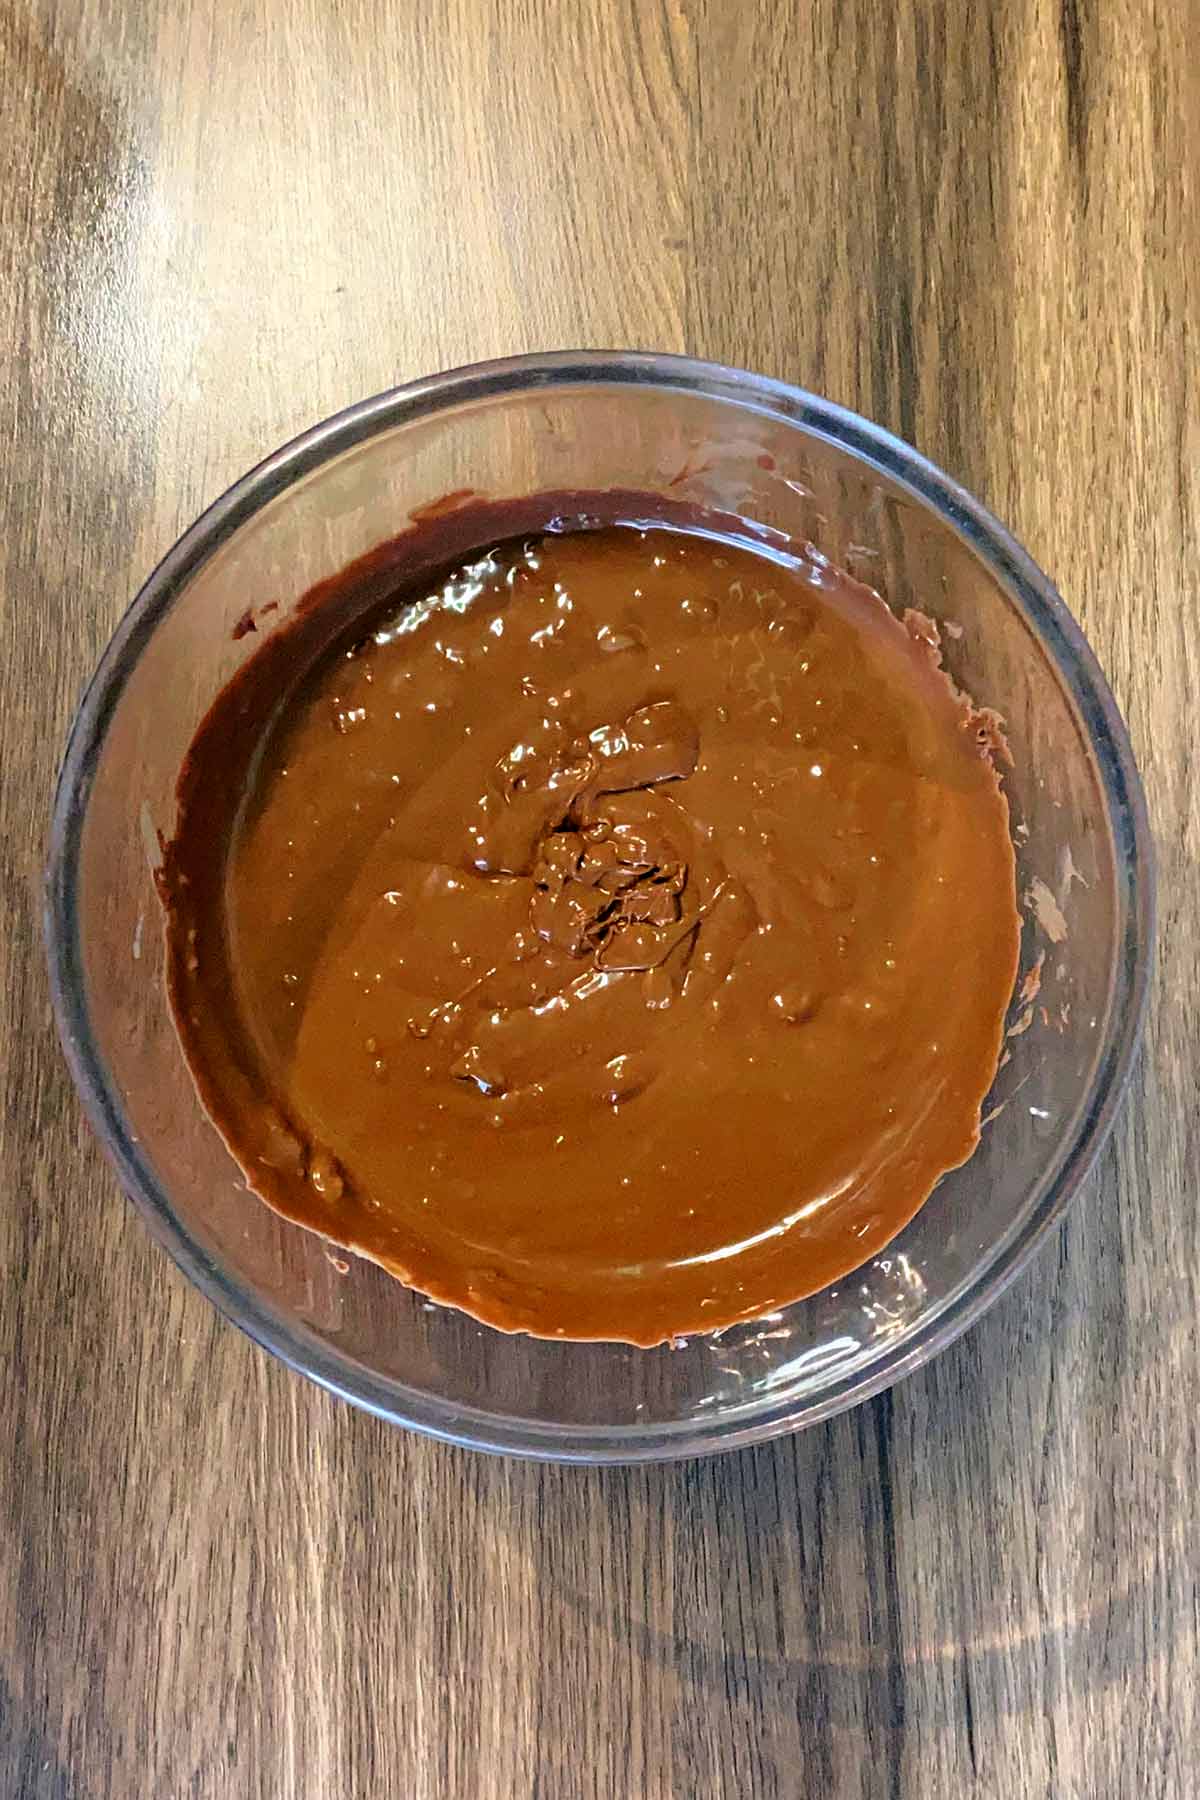 A glass bowl full of melted chocolate.